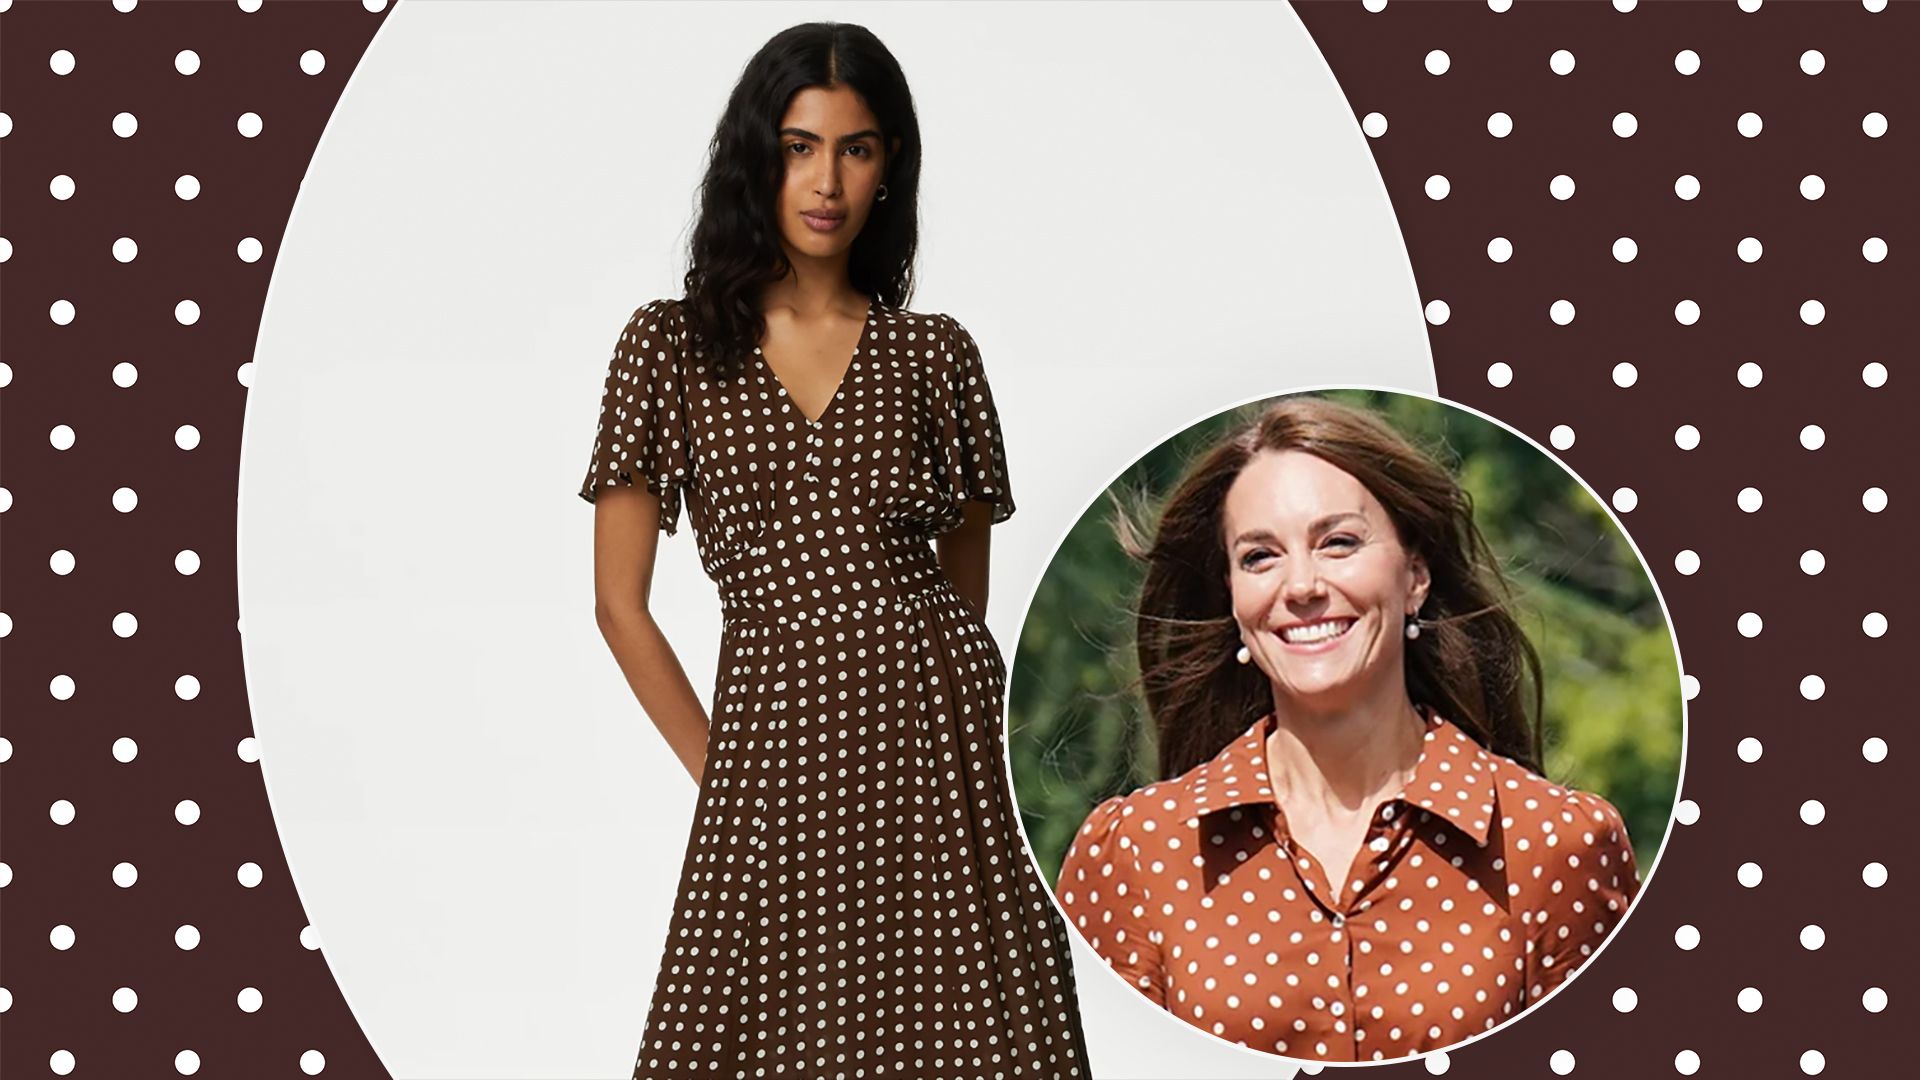 Remember Princess Kate's brown polka dot dress? M&S just dropped a chic lookalike